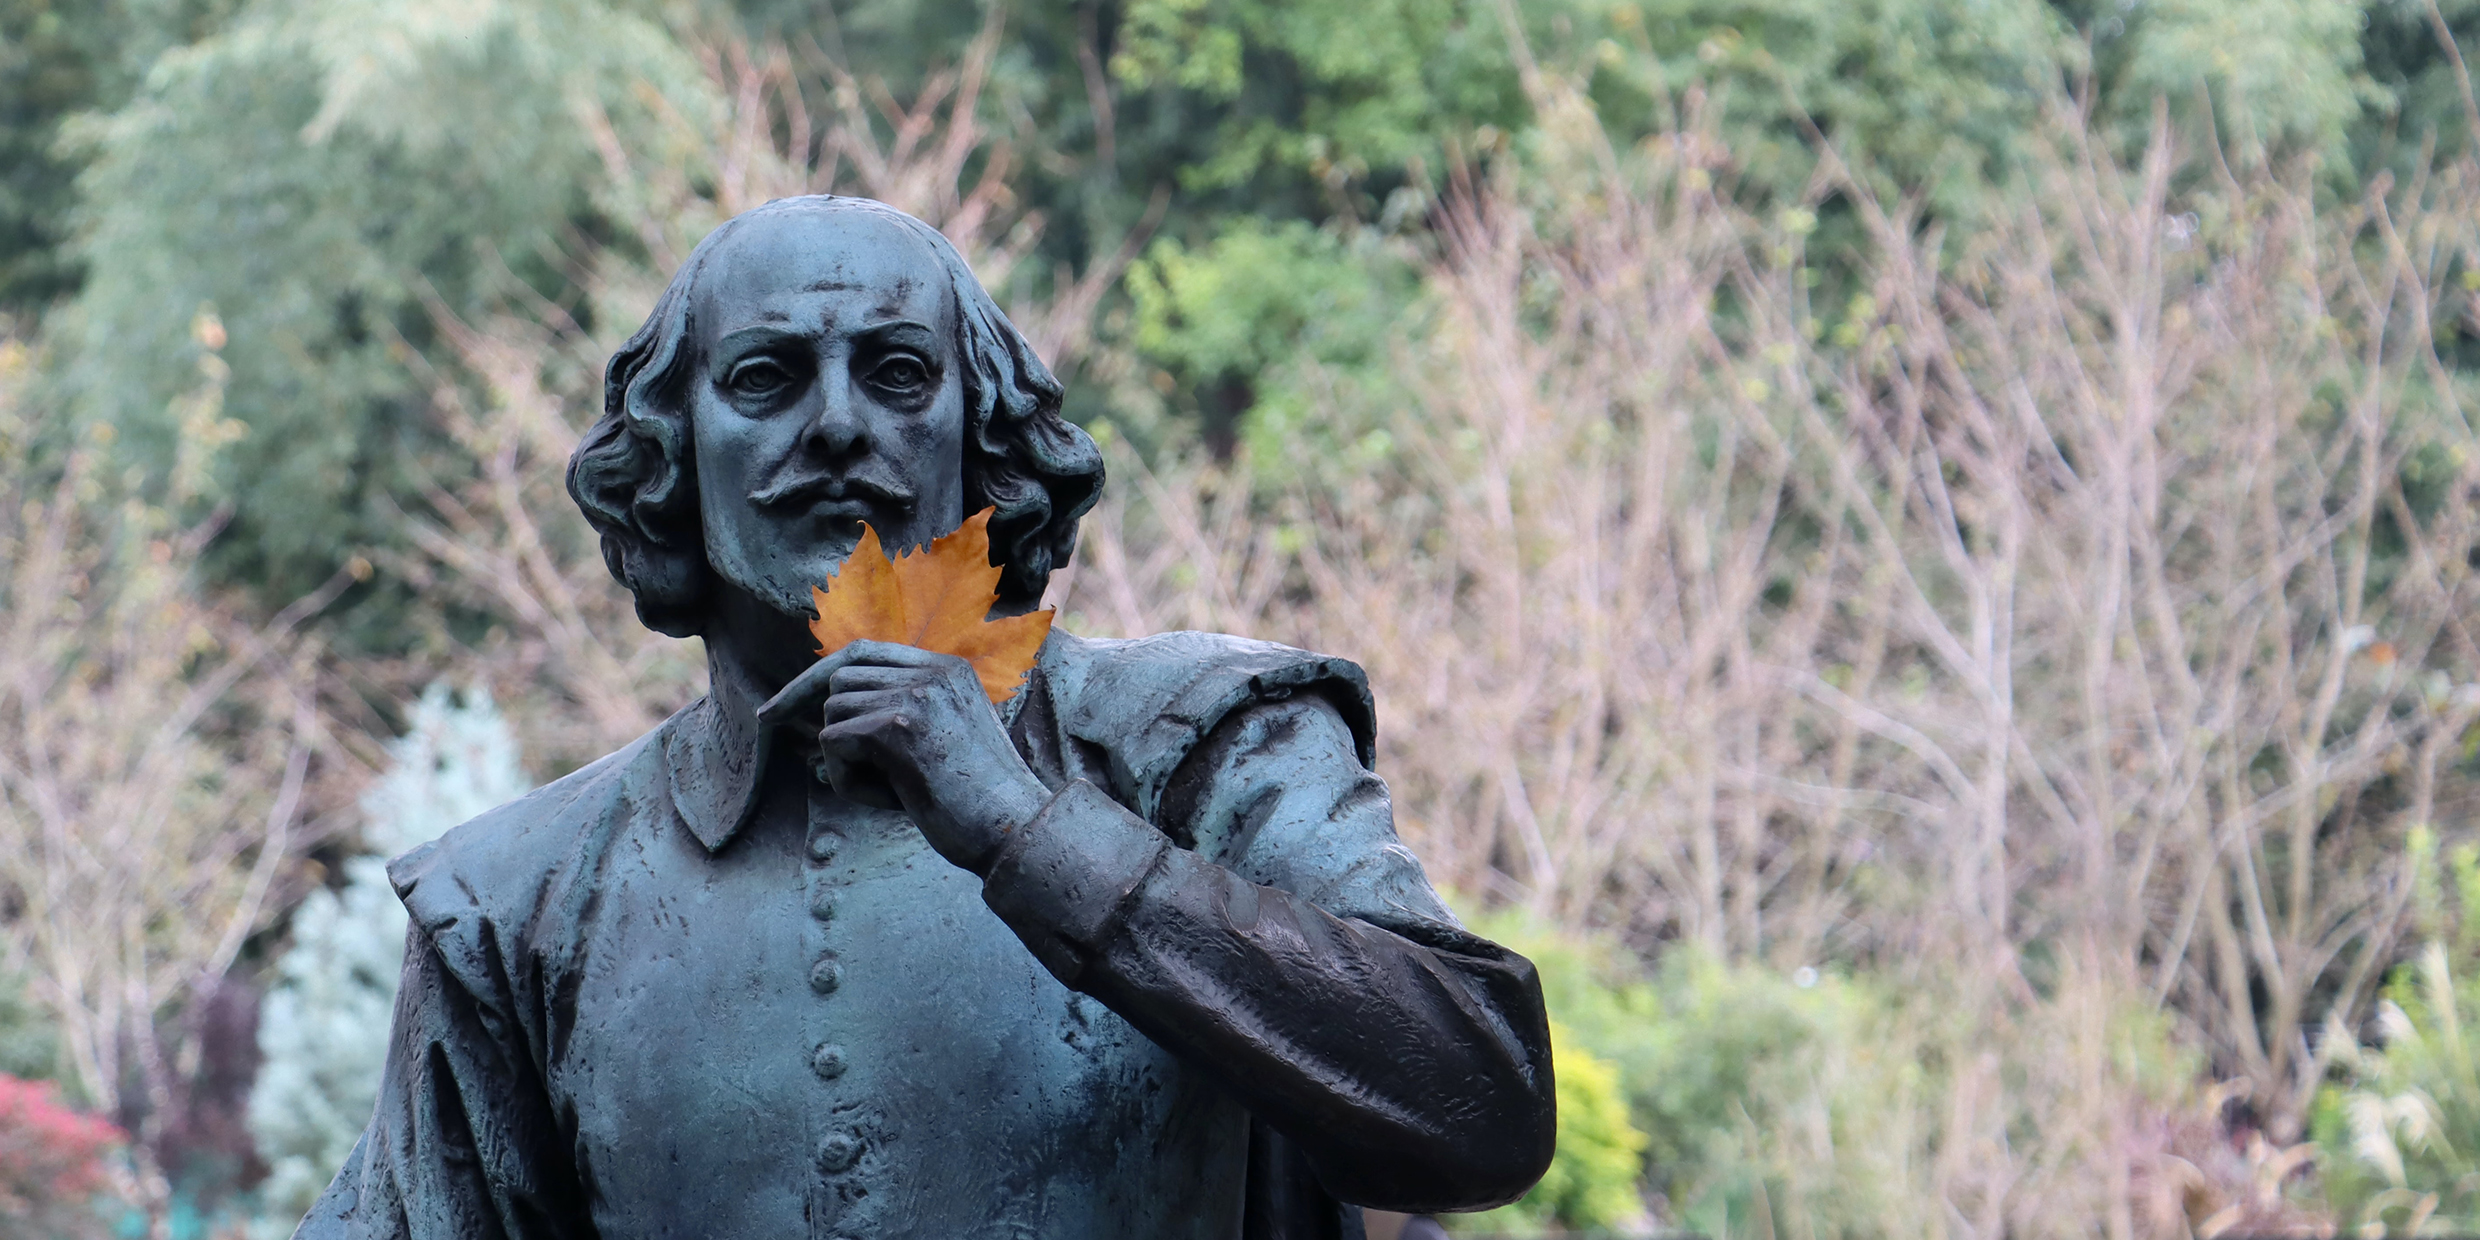 Image of a statue of William Shakespeare with a leaf from a tree placed into its lifted hand